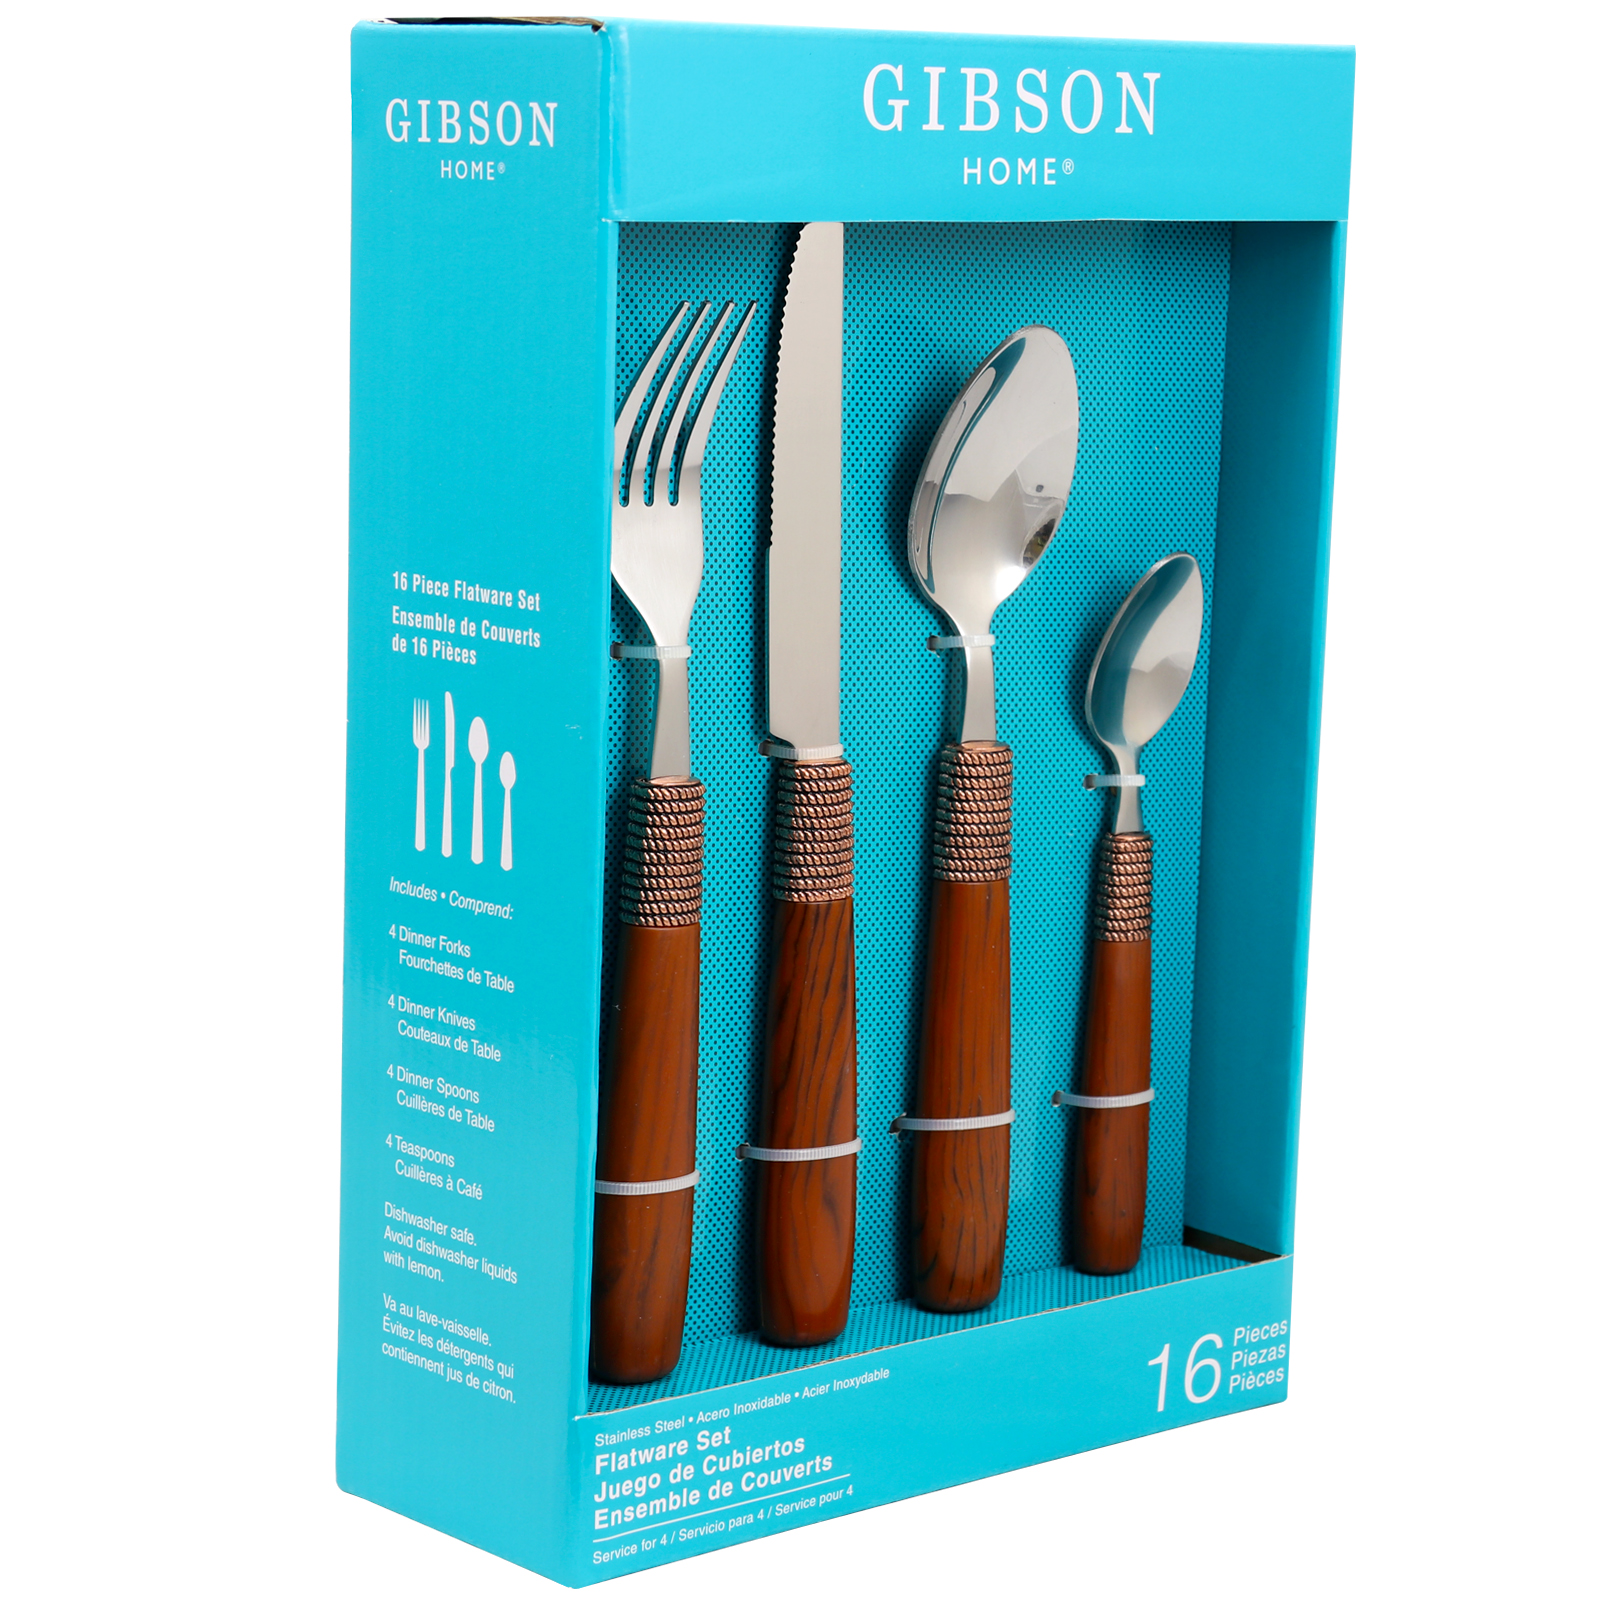 Gibson Home Wood Scroll 16 piece Flatware Set with Wood Handle